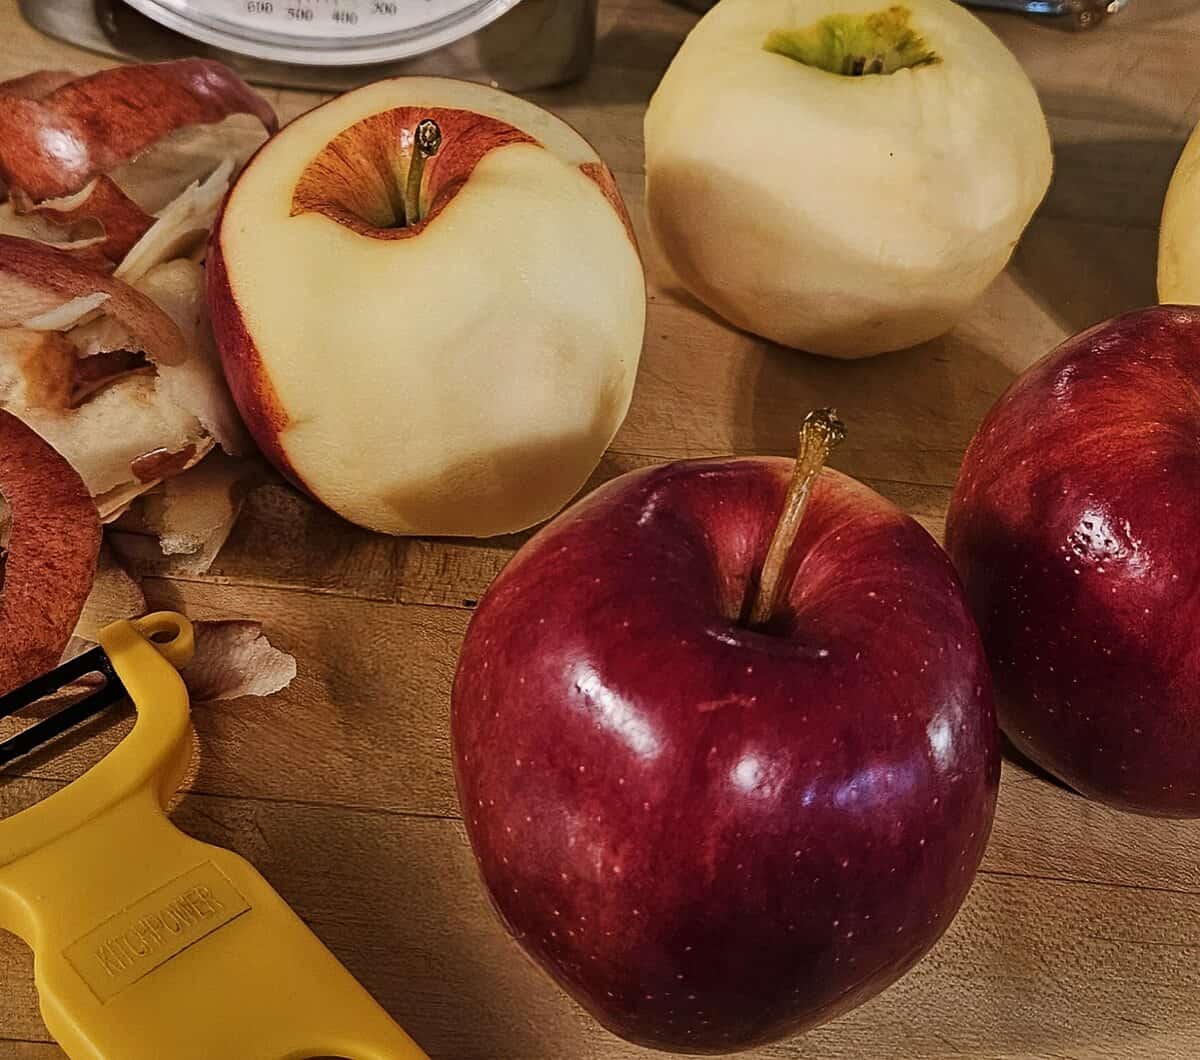 apples, whole, both peeled and un peeled, with peeler and peels